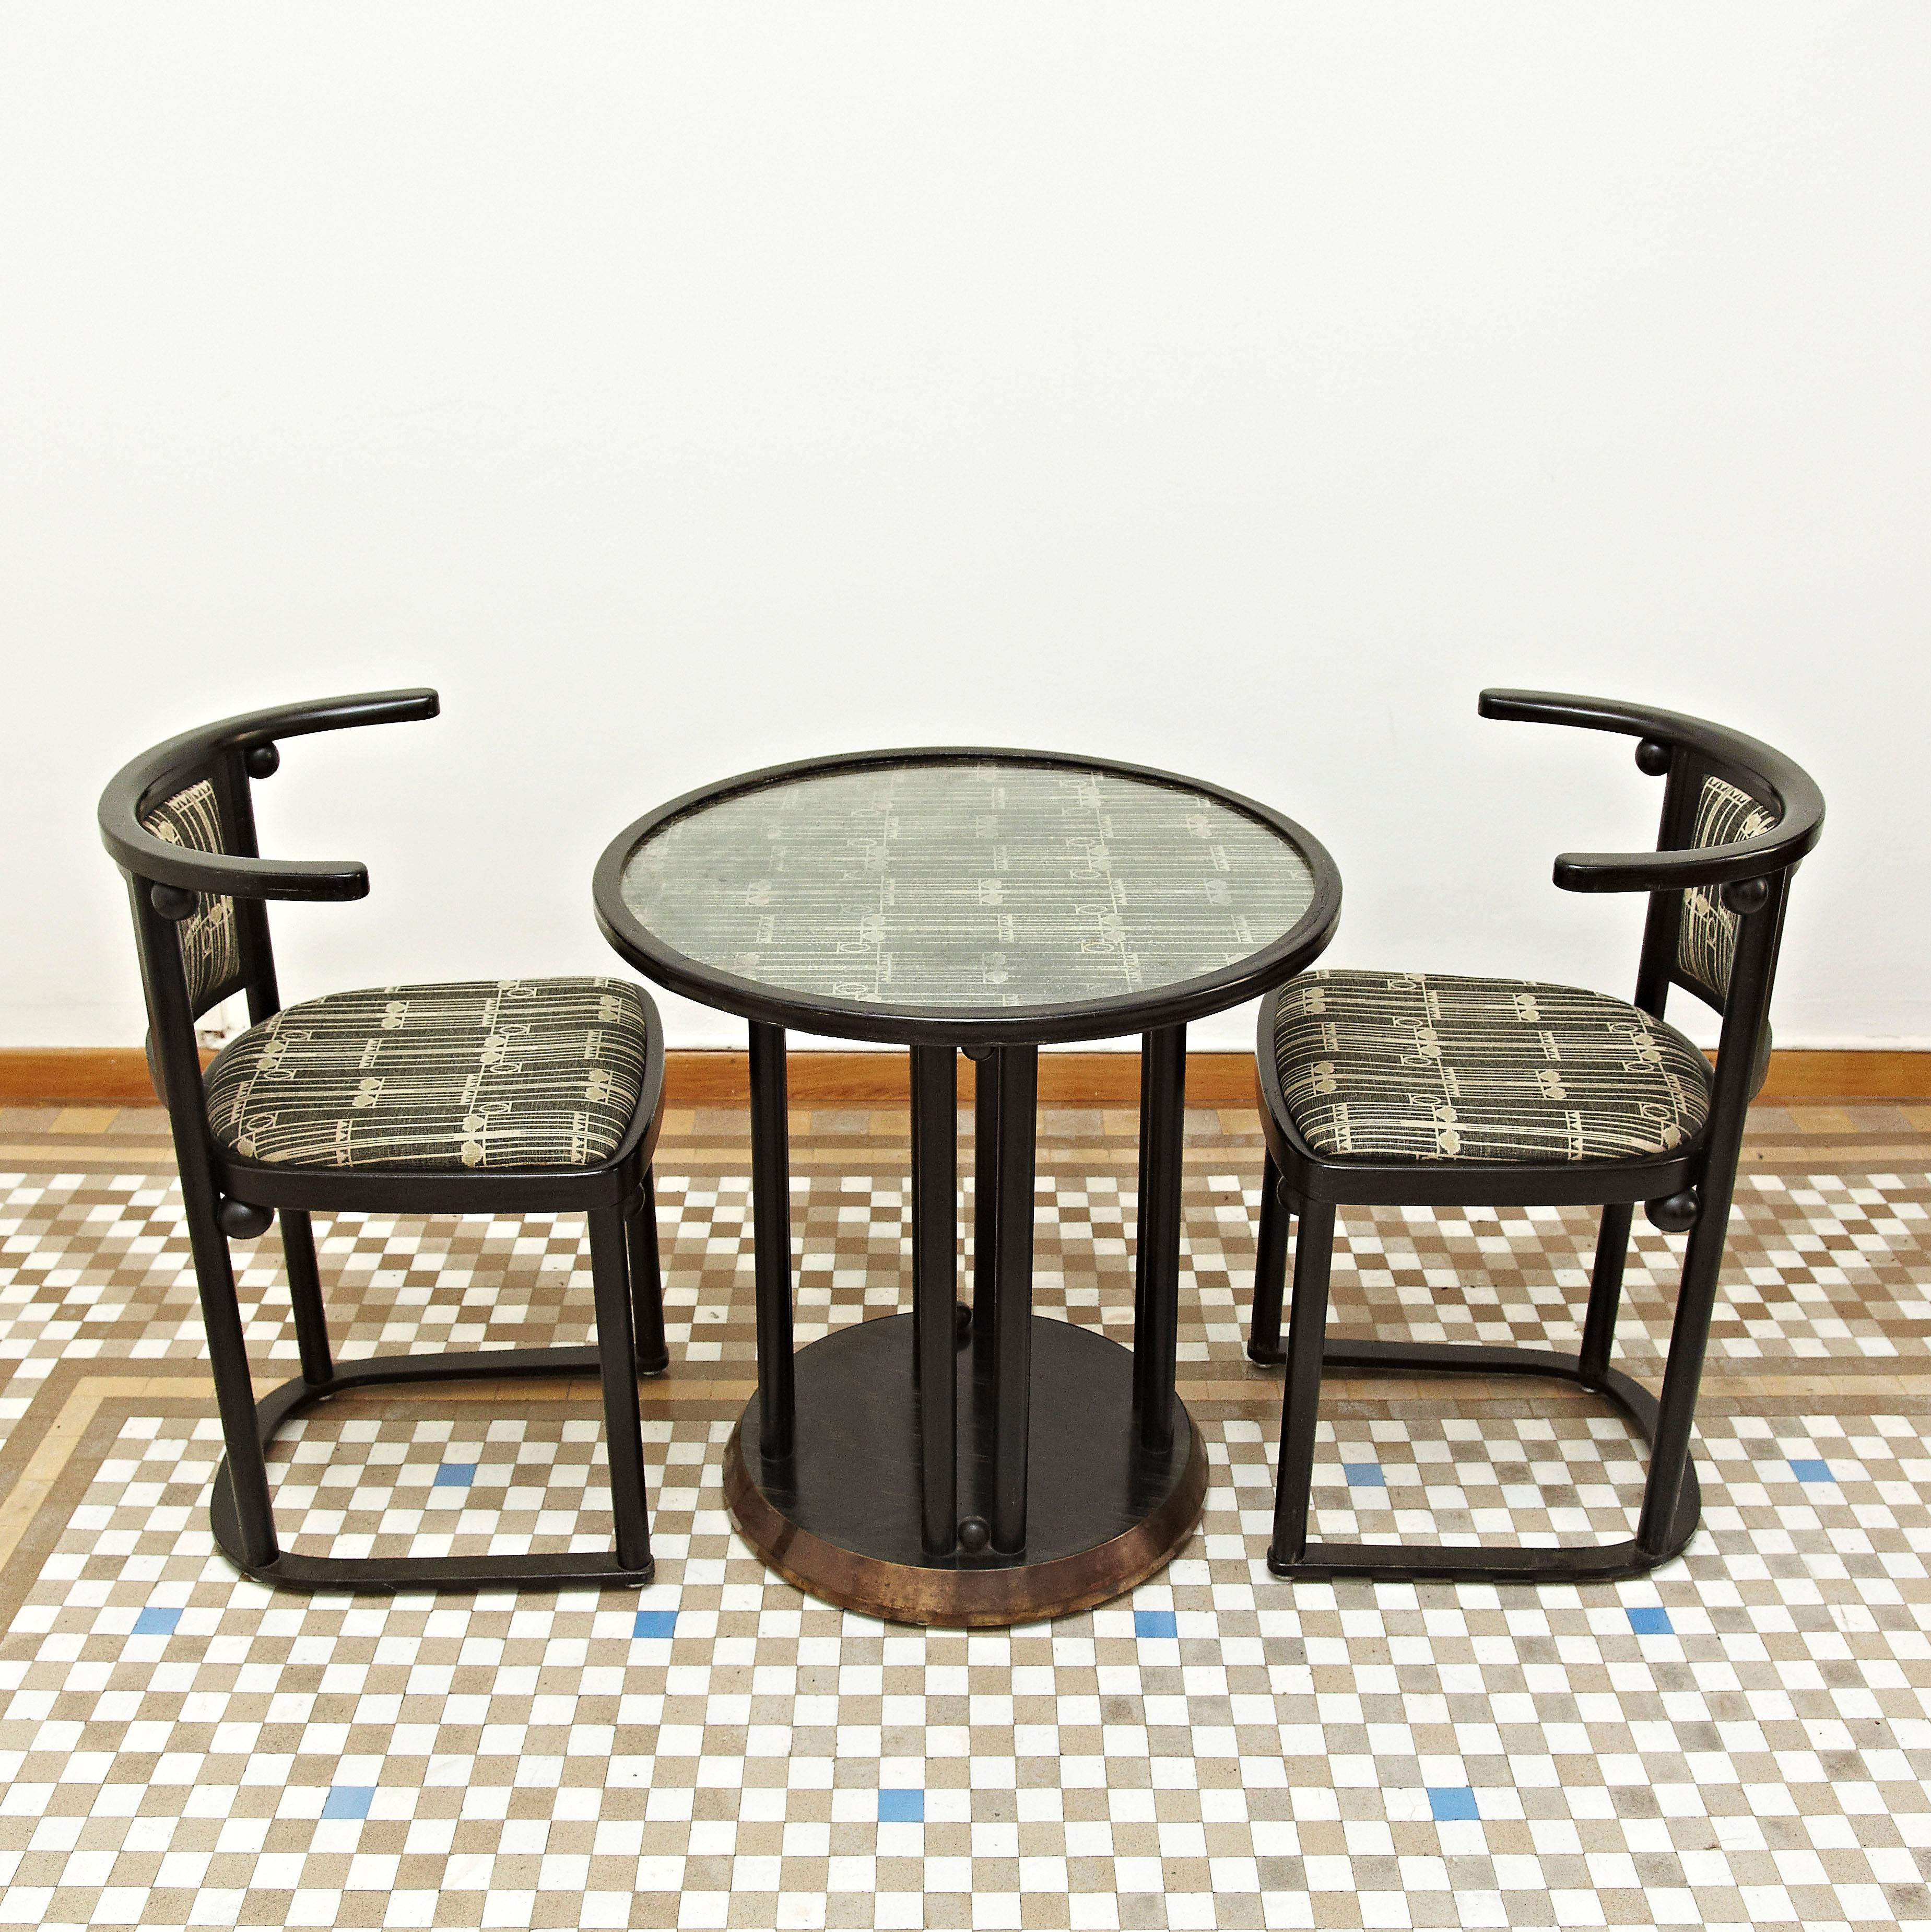 Set of two chairs and coffee table designed by Josef Hoffmann, circa 1905 for Cabaret Fledermaus in Viena.
Manufactured by Wittmann (Austria), circa 1960.
Lacquered wood and original upholstery.

With manufacturers label to the underside.

In